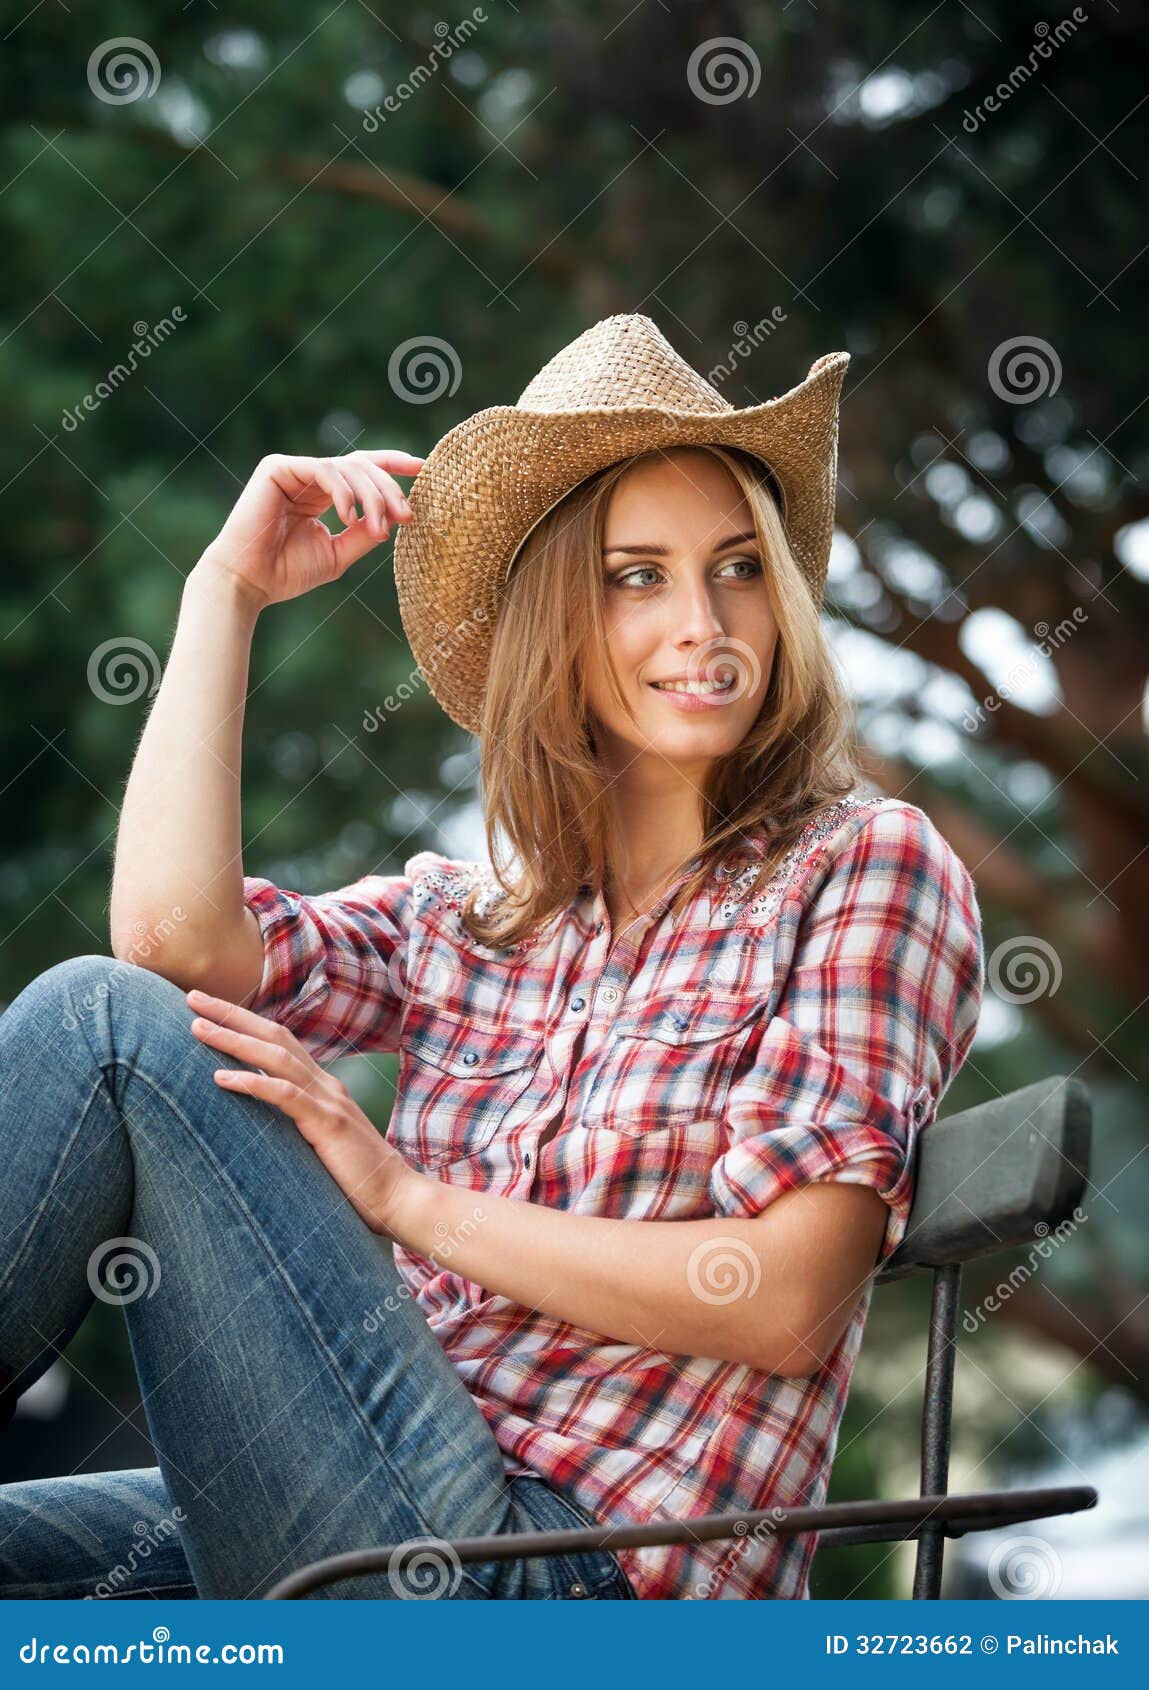 Cowgirl. stock photo. Image of glamour, girl, portrait - 32723662